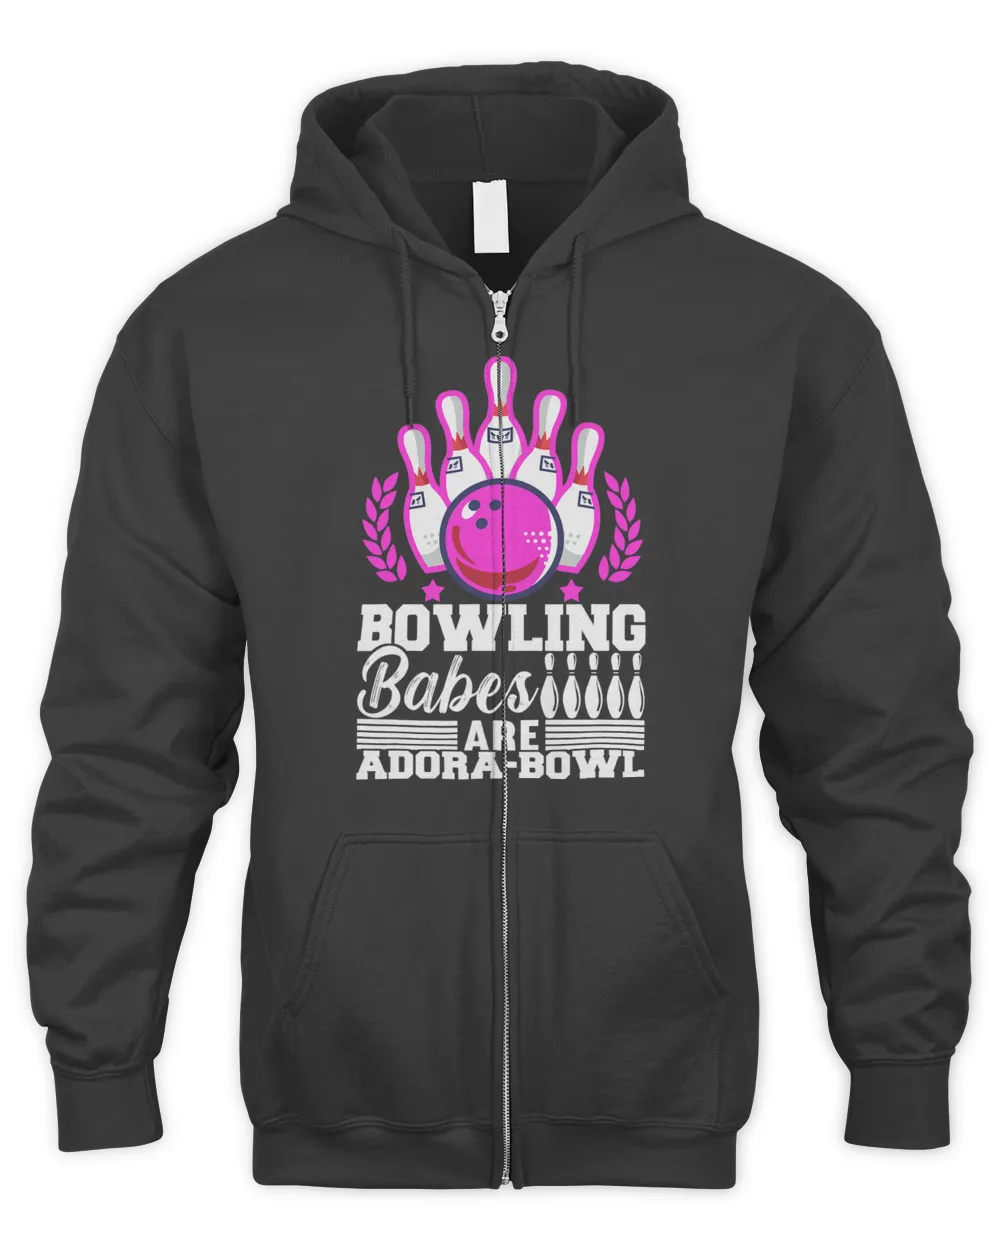 Bowling Babes Bowler Outfit Bowling Apparel 3